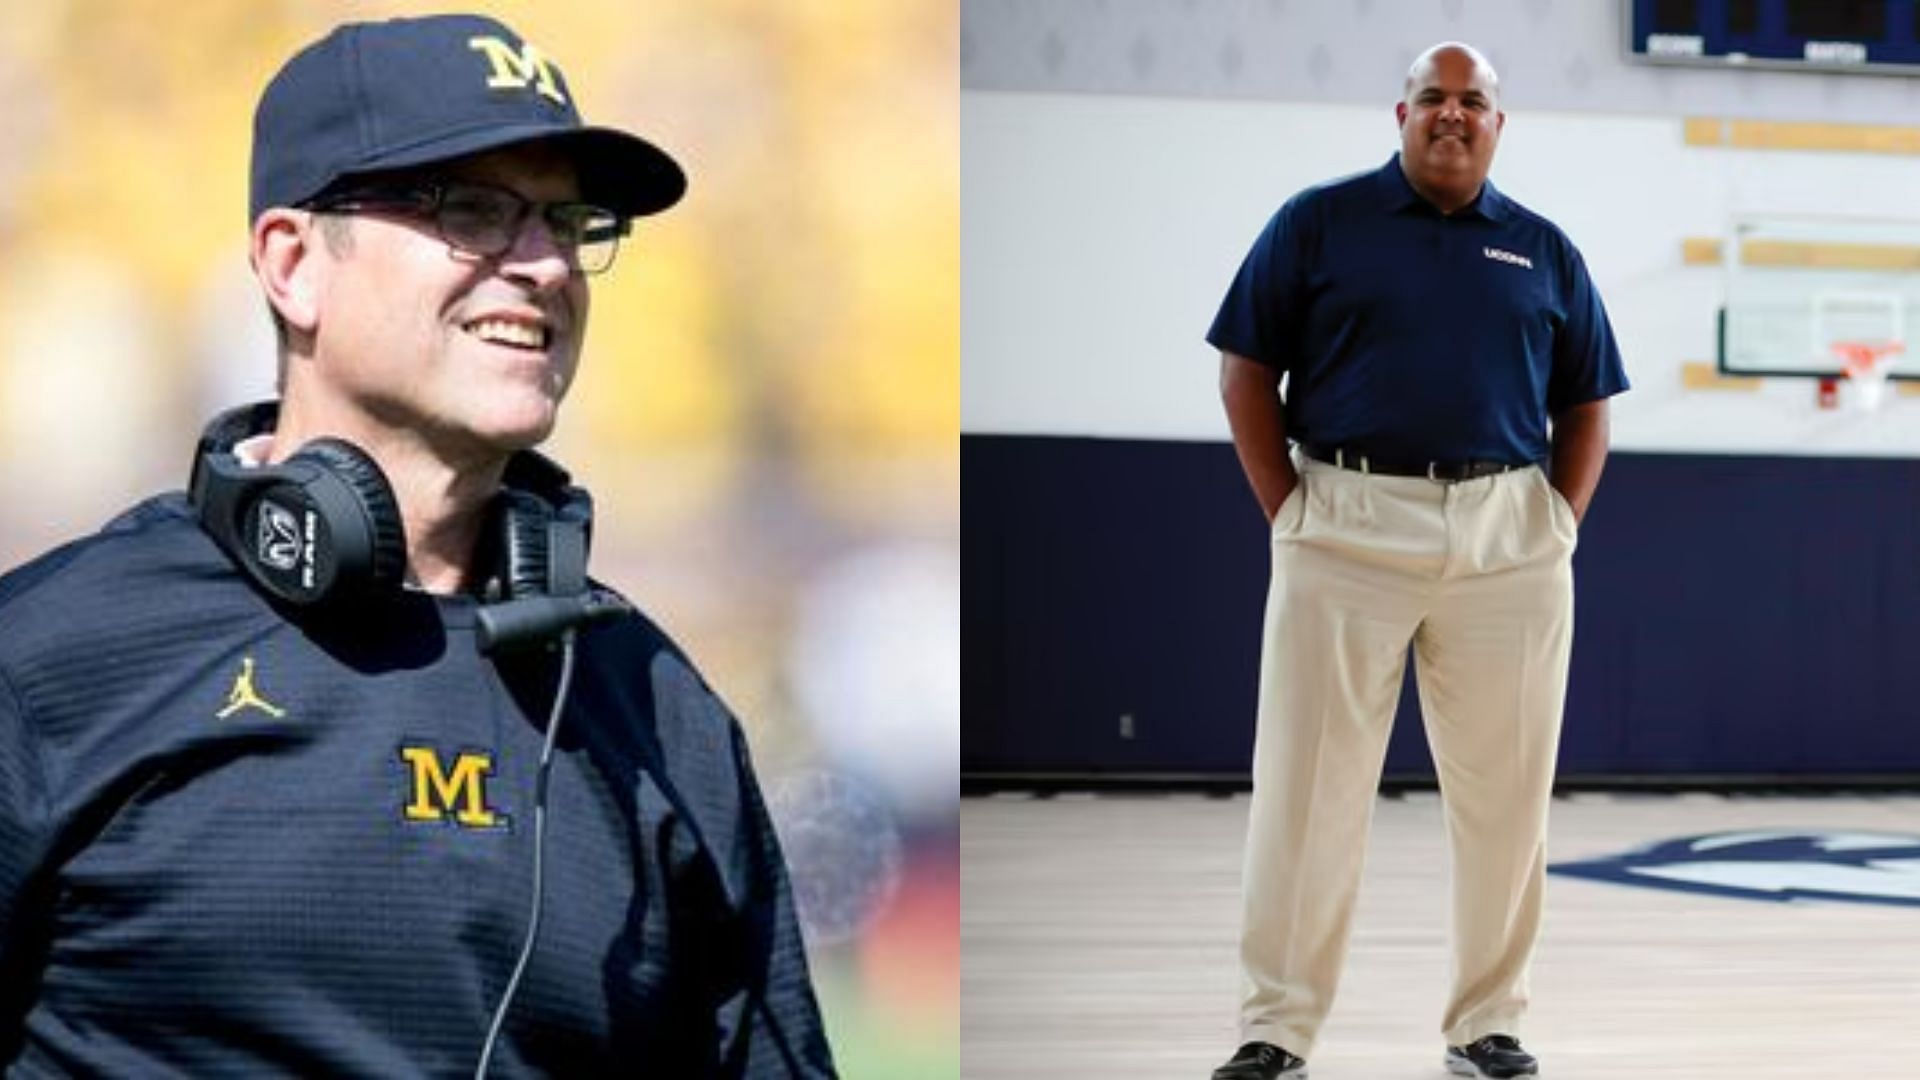 Jim Harbaugh and Warde Manuel seemingly did not have a great relationship at the end of the tenure